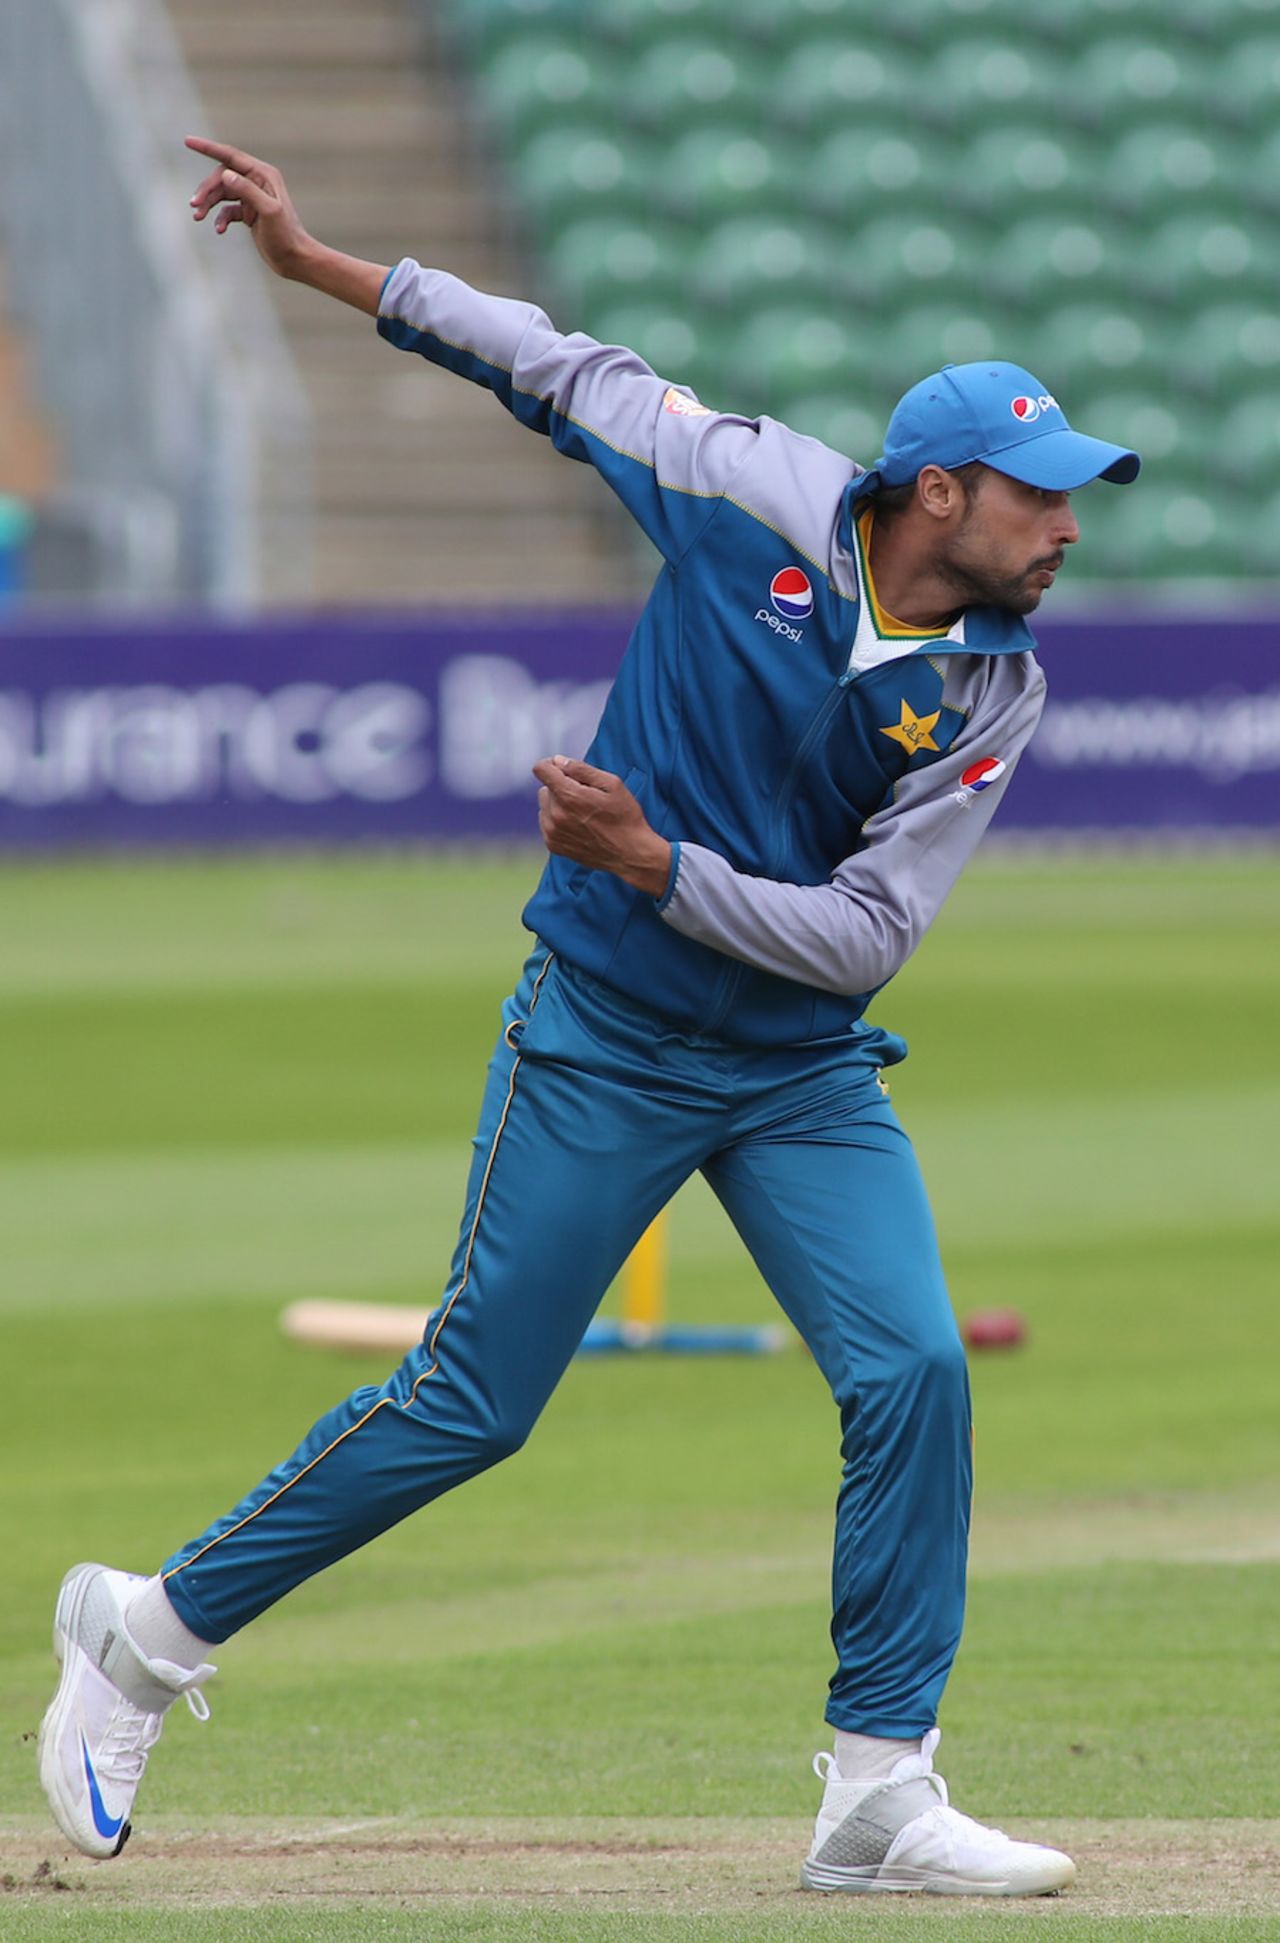 Mohammad Amir warms up before play, Somerset v Pakistanis, Taunton, 1st day, July 3, 2016